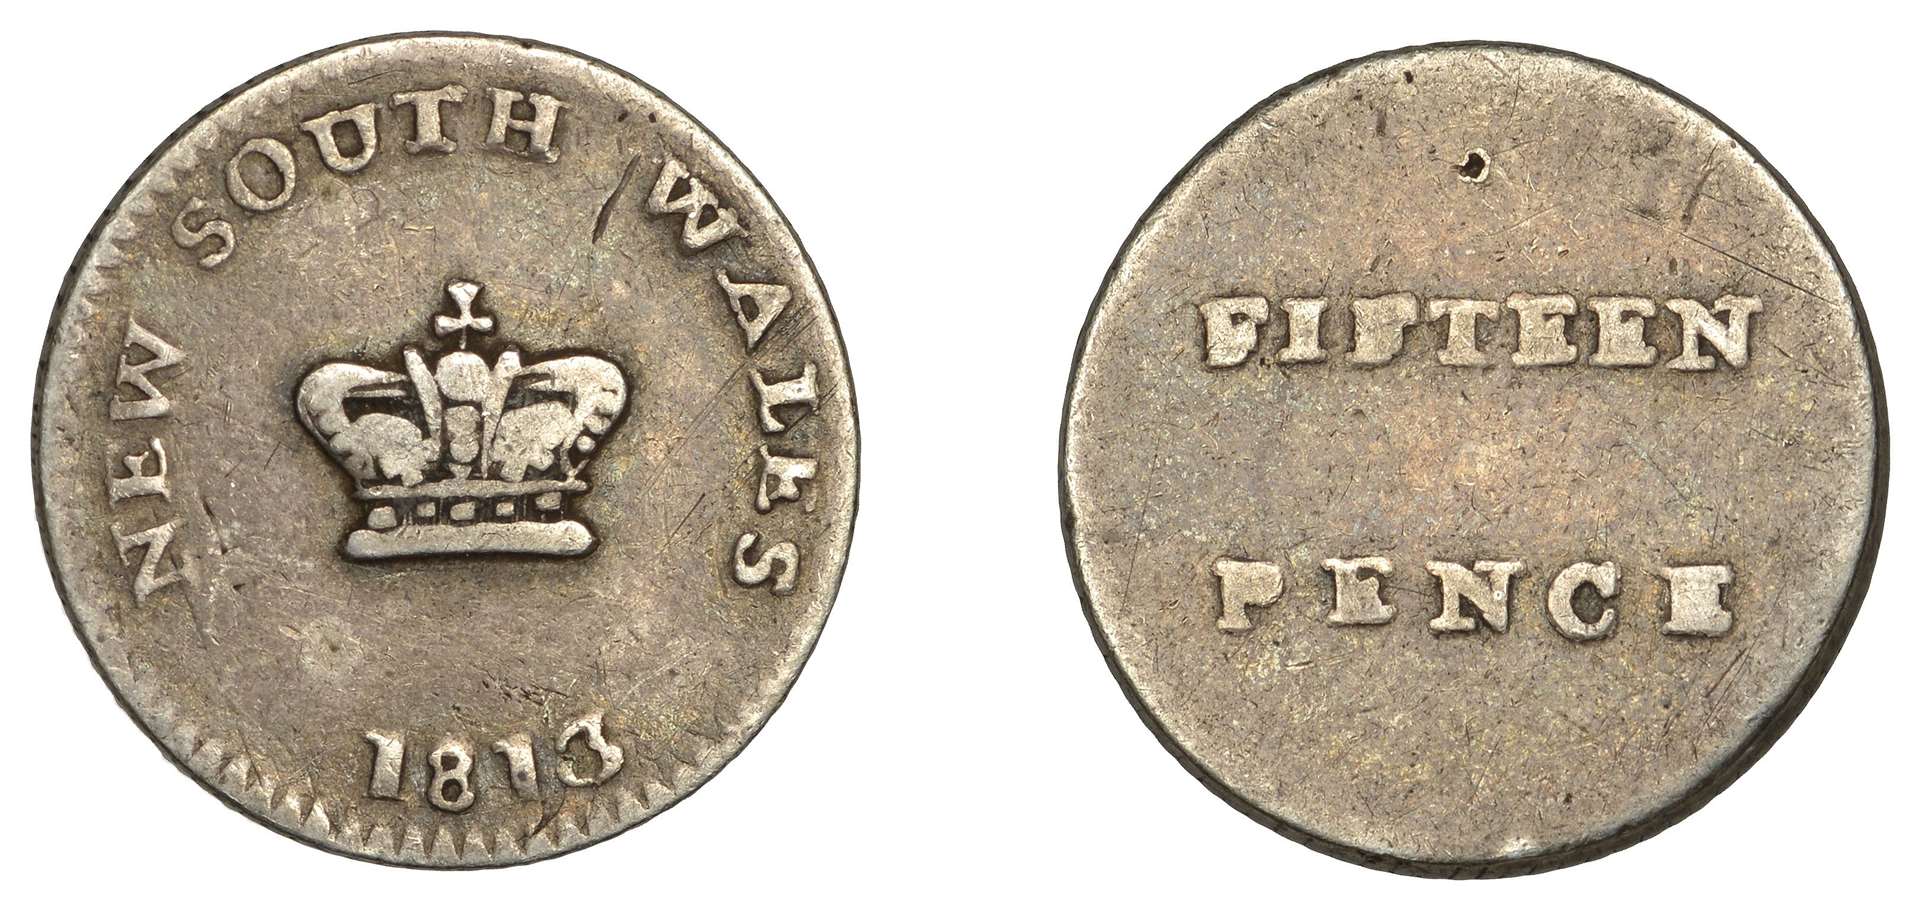 The Australian New South Wales Fifteen Pence known as Dump, dating from 1813. Picture: Noonans